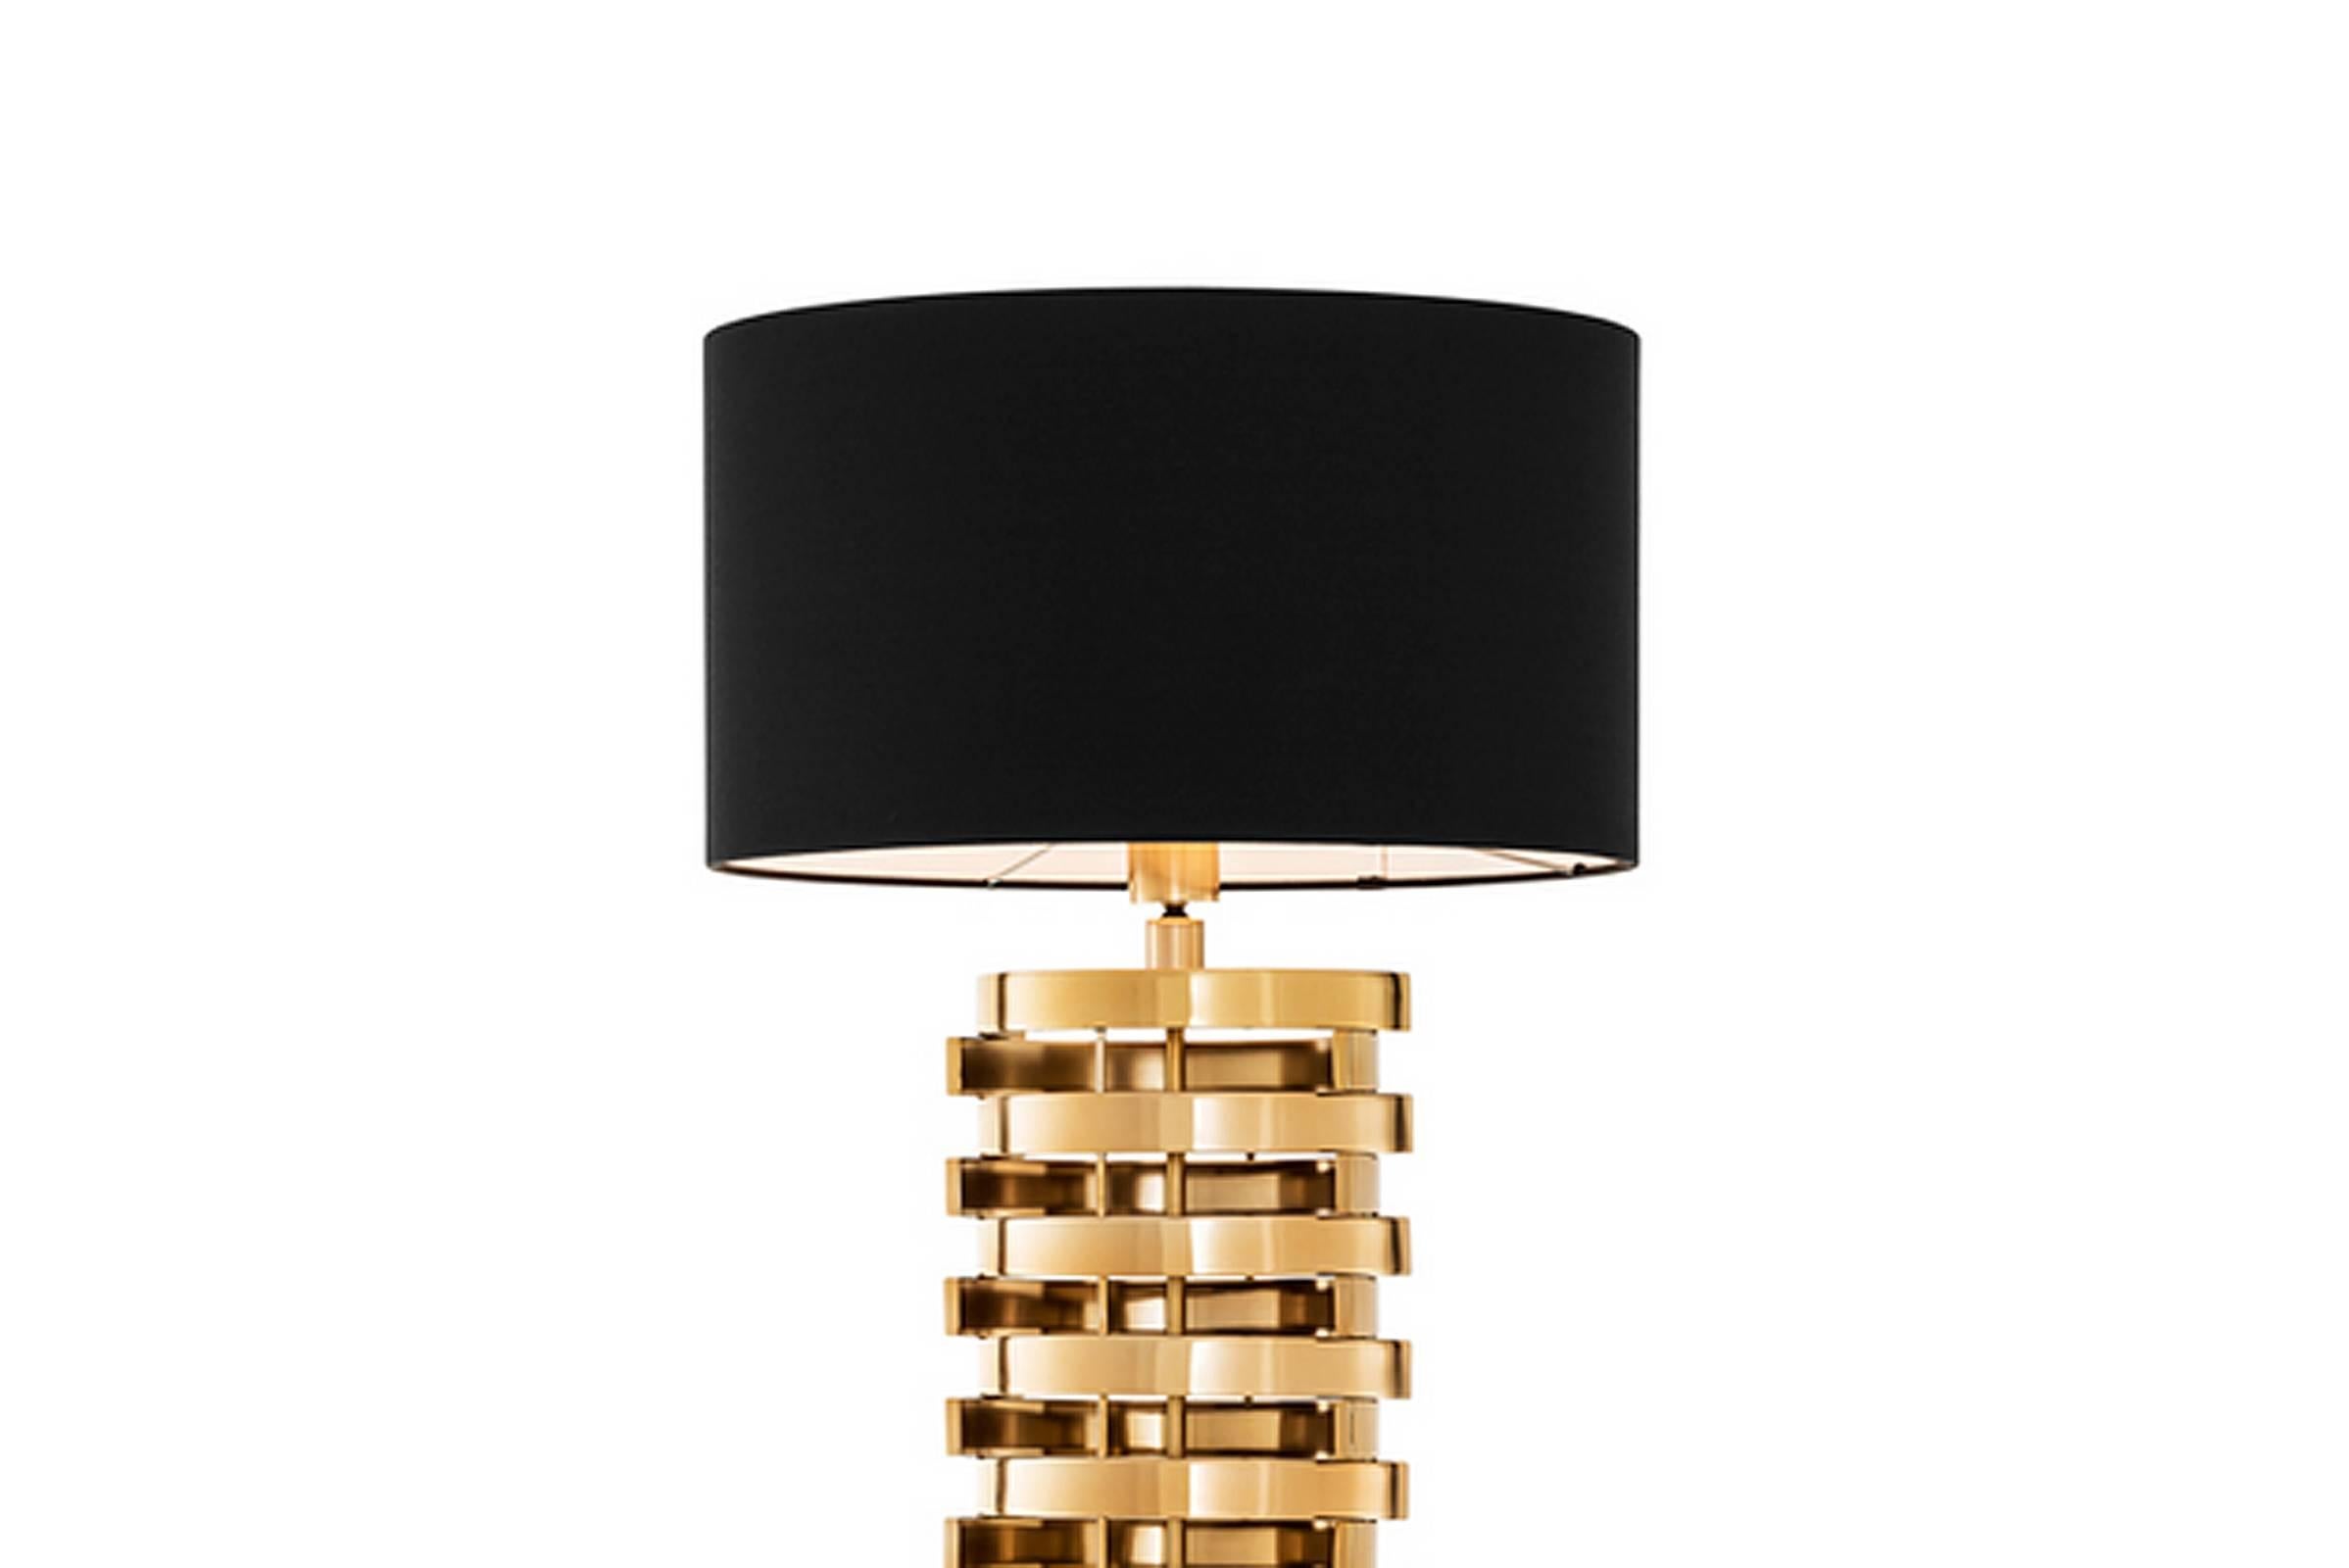 Floor lamp in gold finish with black lamp shade.
